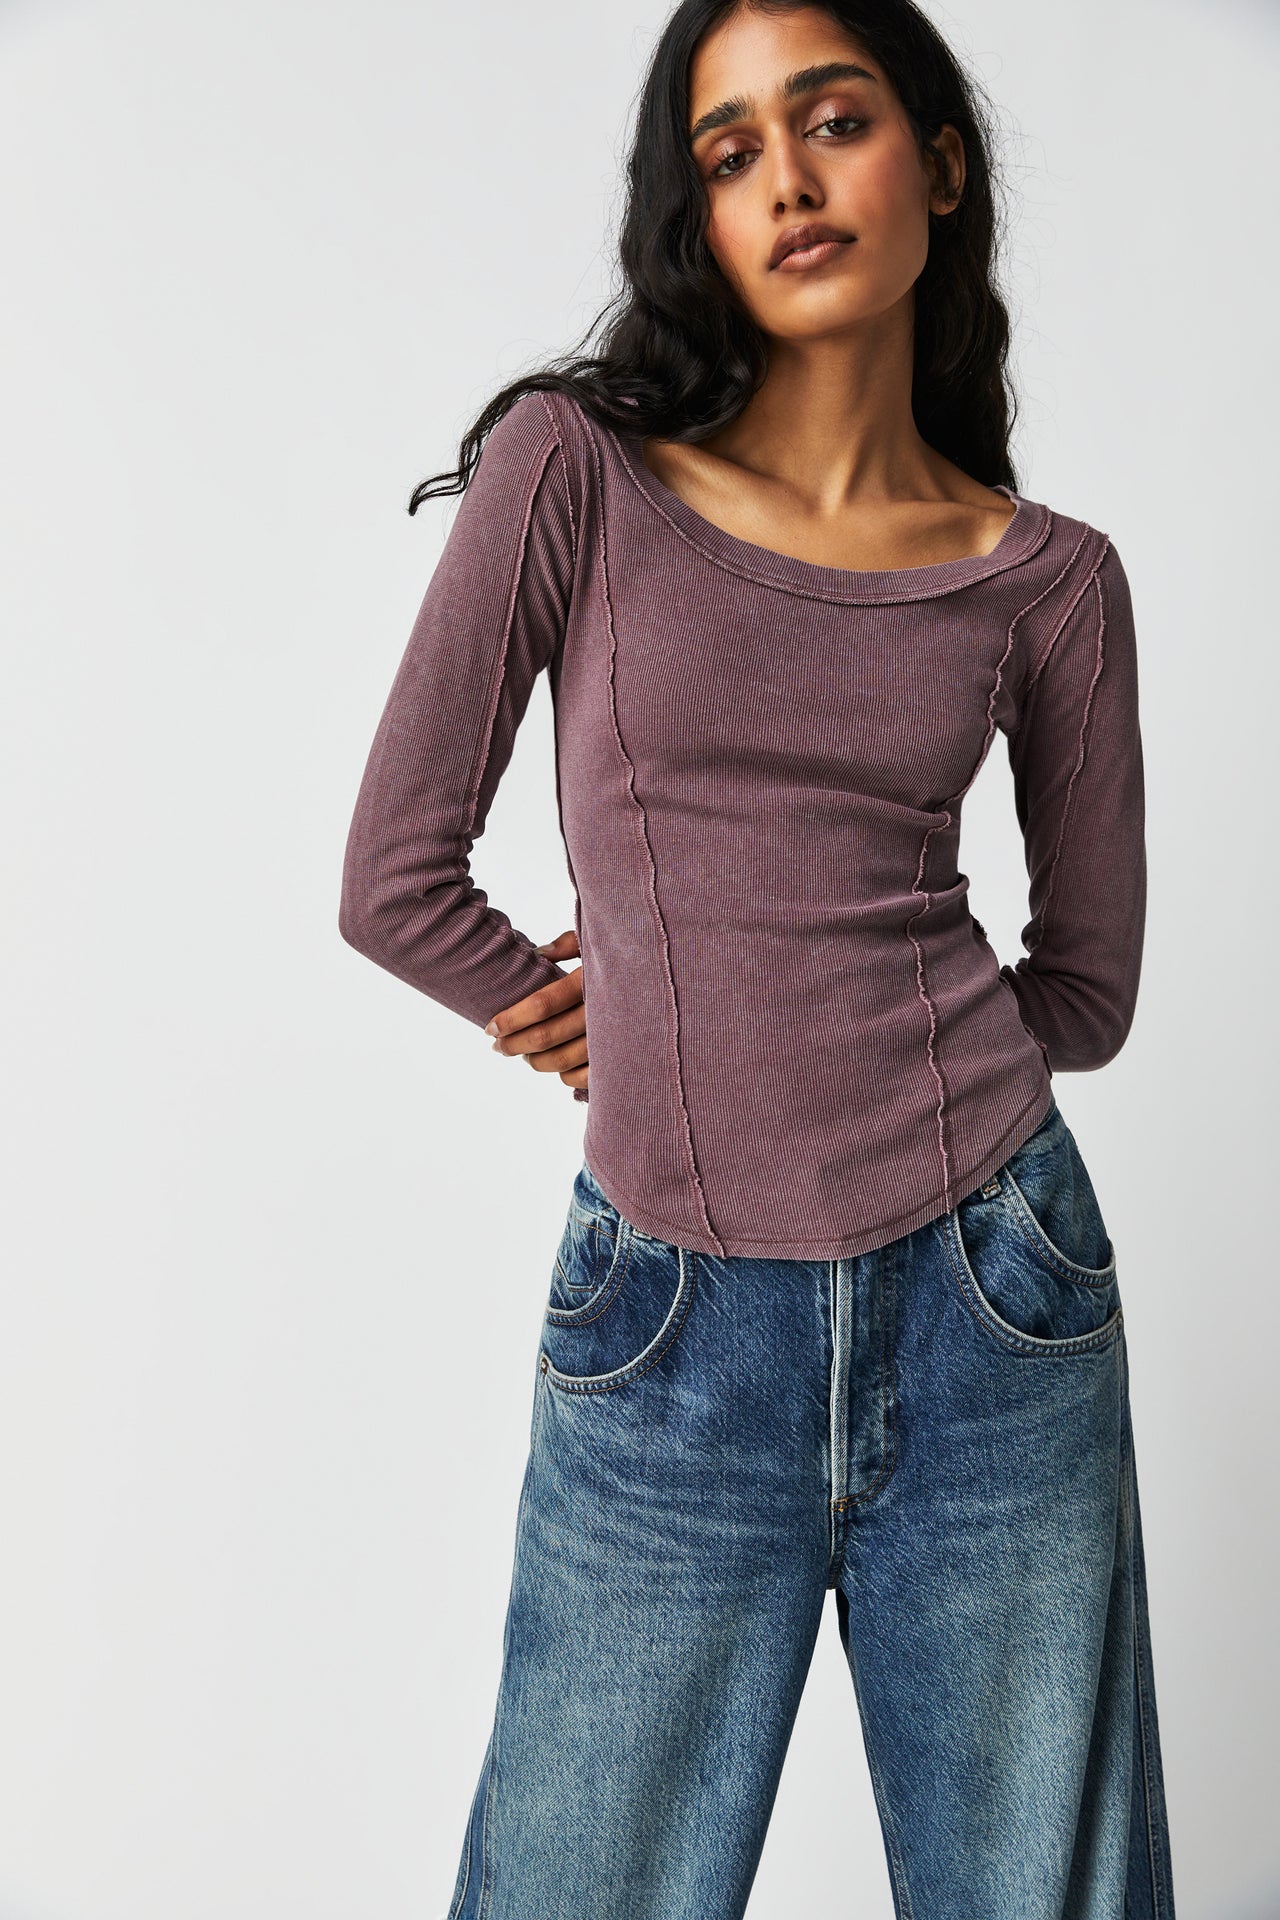 Stuck On You Cuff Hickory, Long Tee by Free People | LIT Boutique